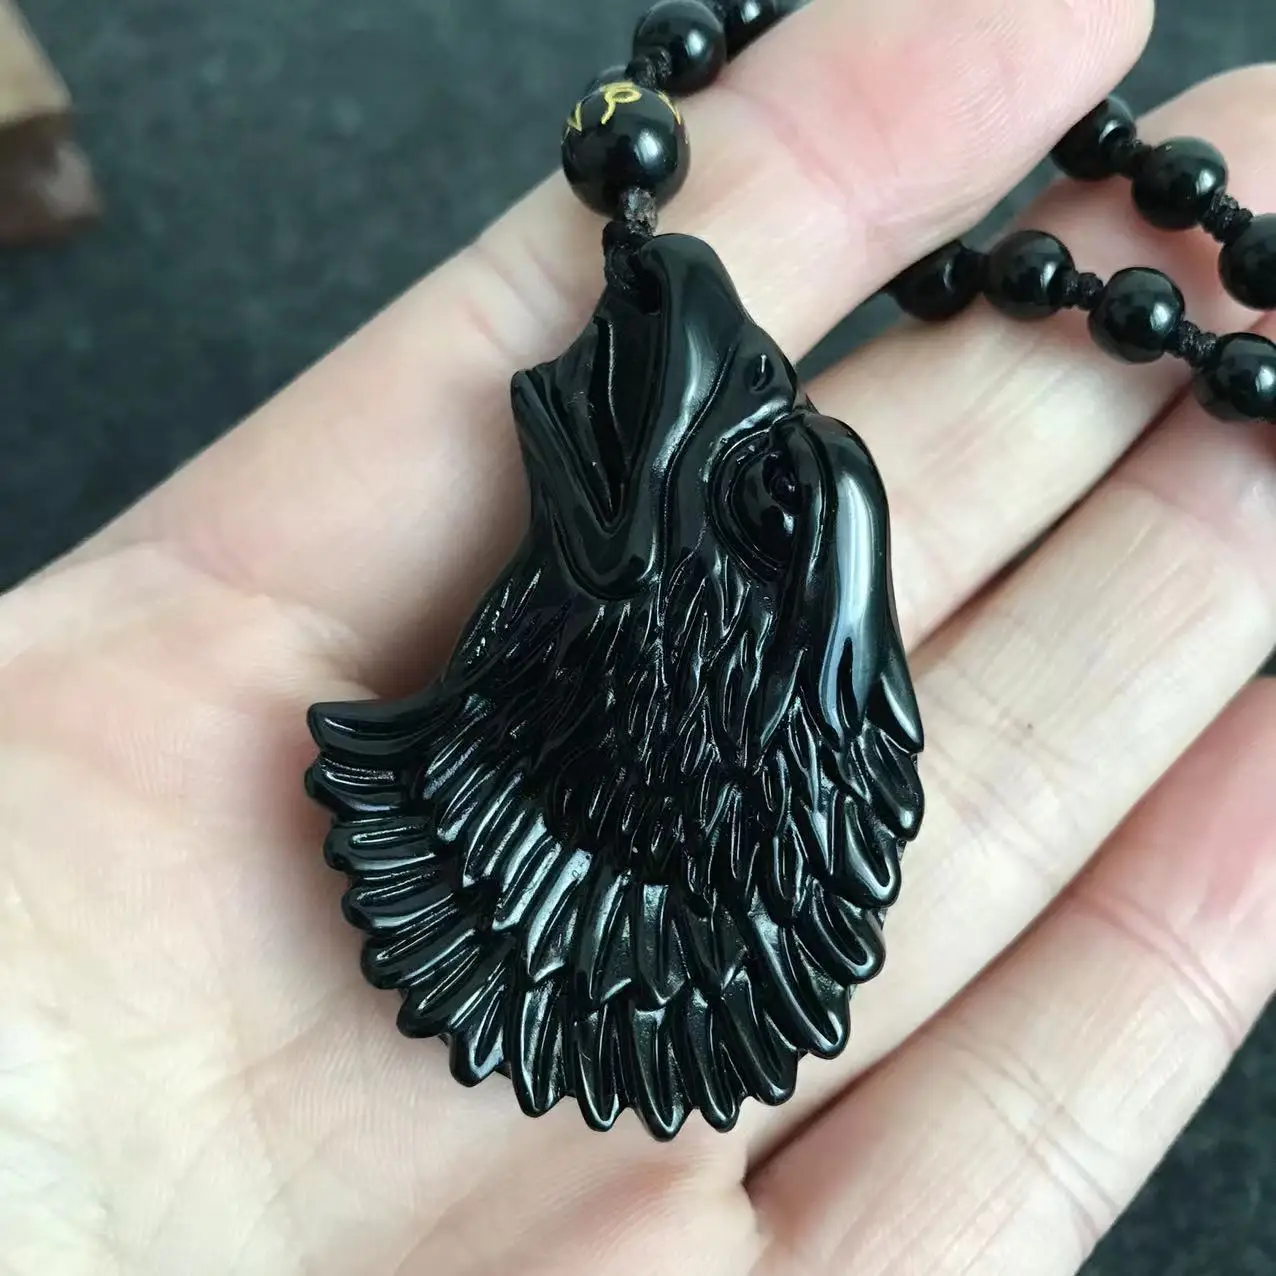 

Black Obsidian Necklace Pendant Handcrafted Eagle Amulet Healing Jewletry for Men Talisman Mens Jewelry Womens Jewelry